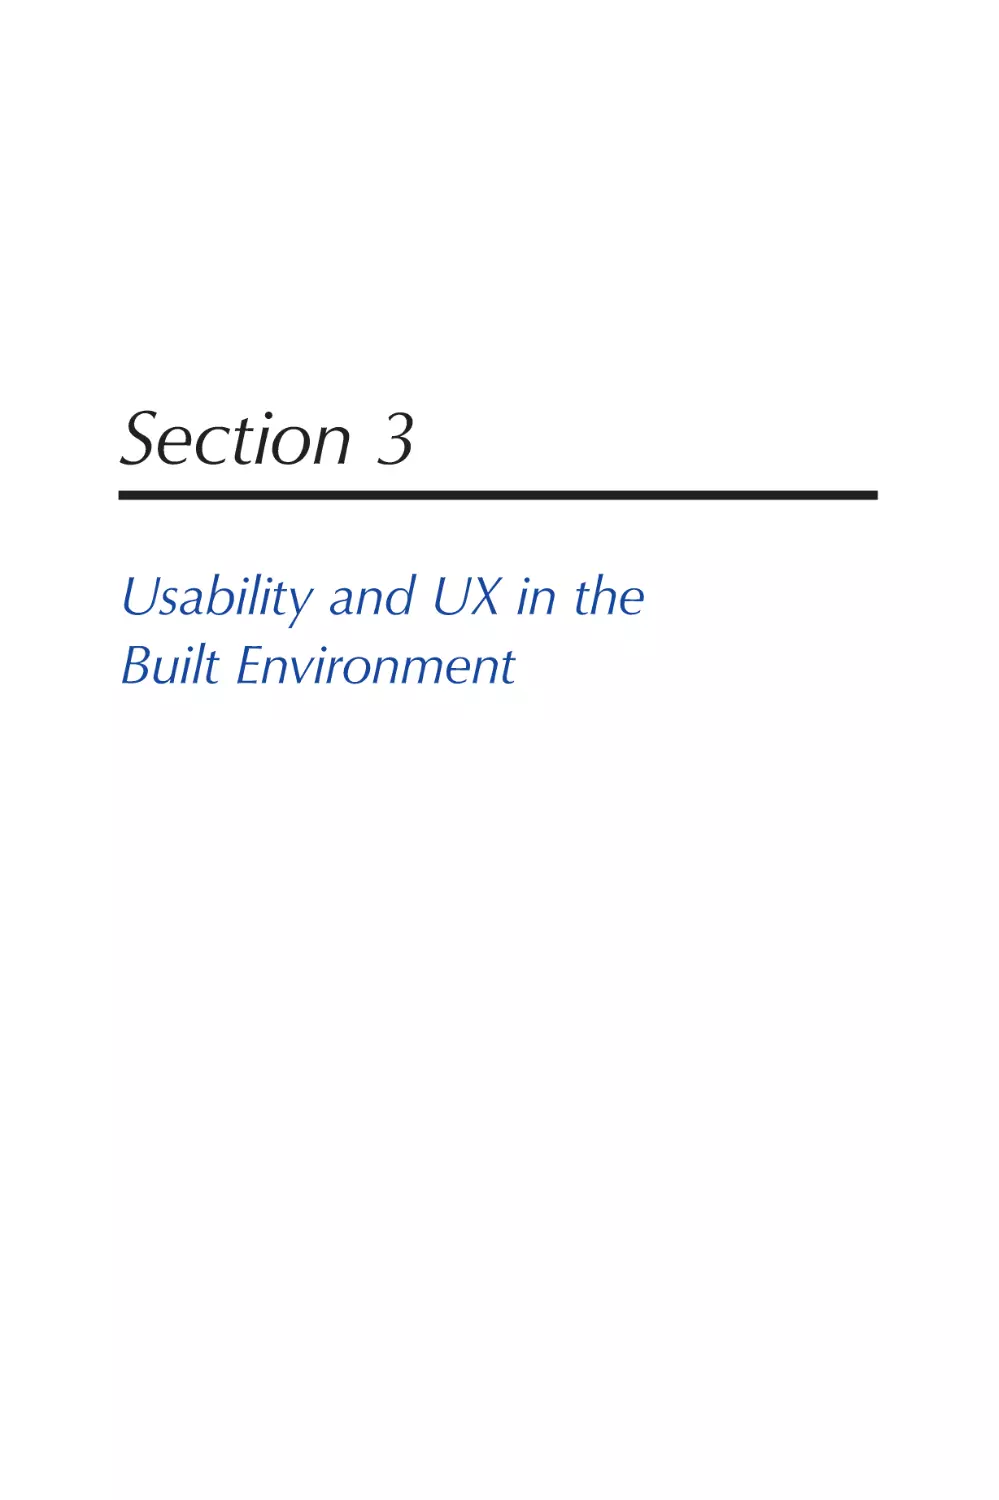 Section 3 Usability and UX in the Built Environment